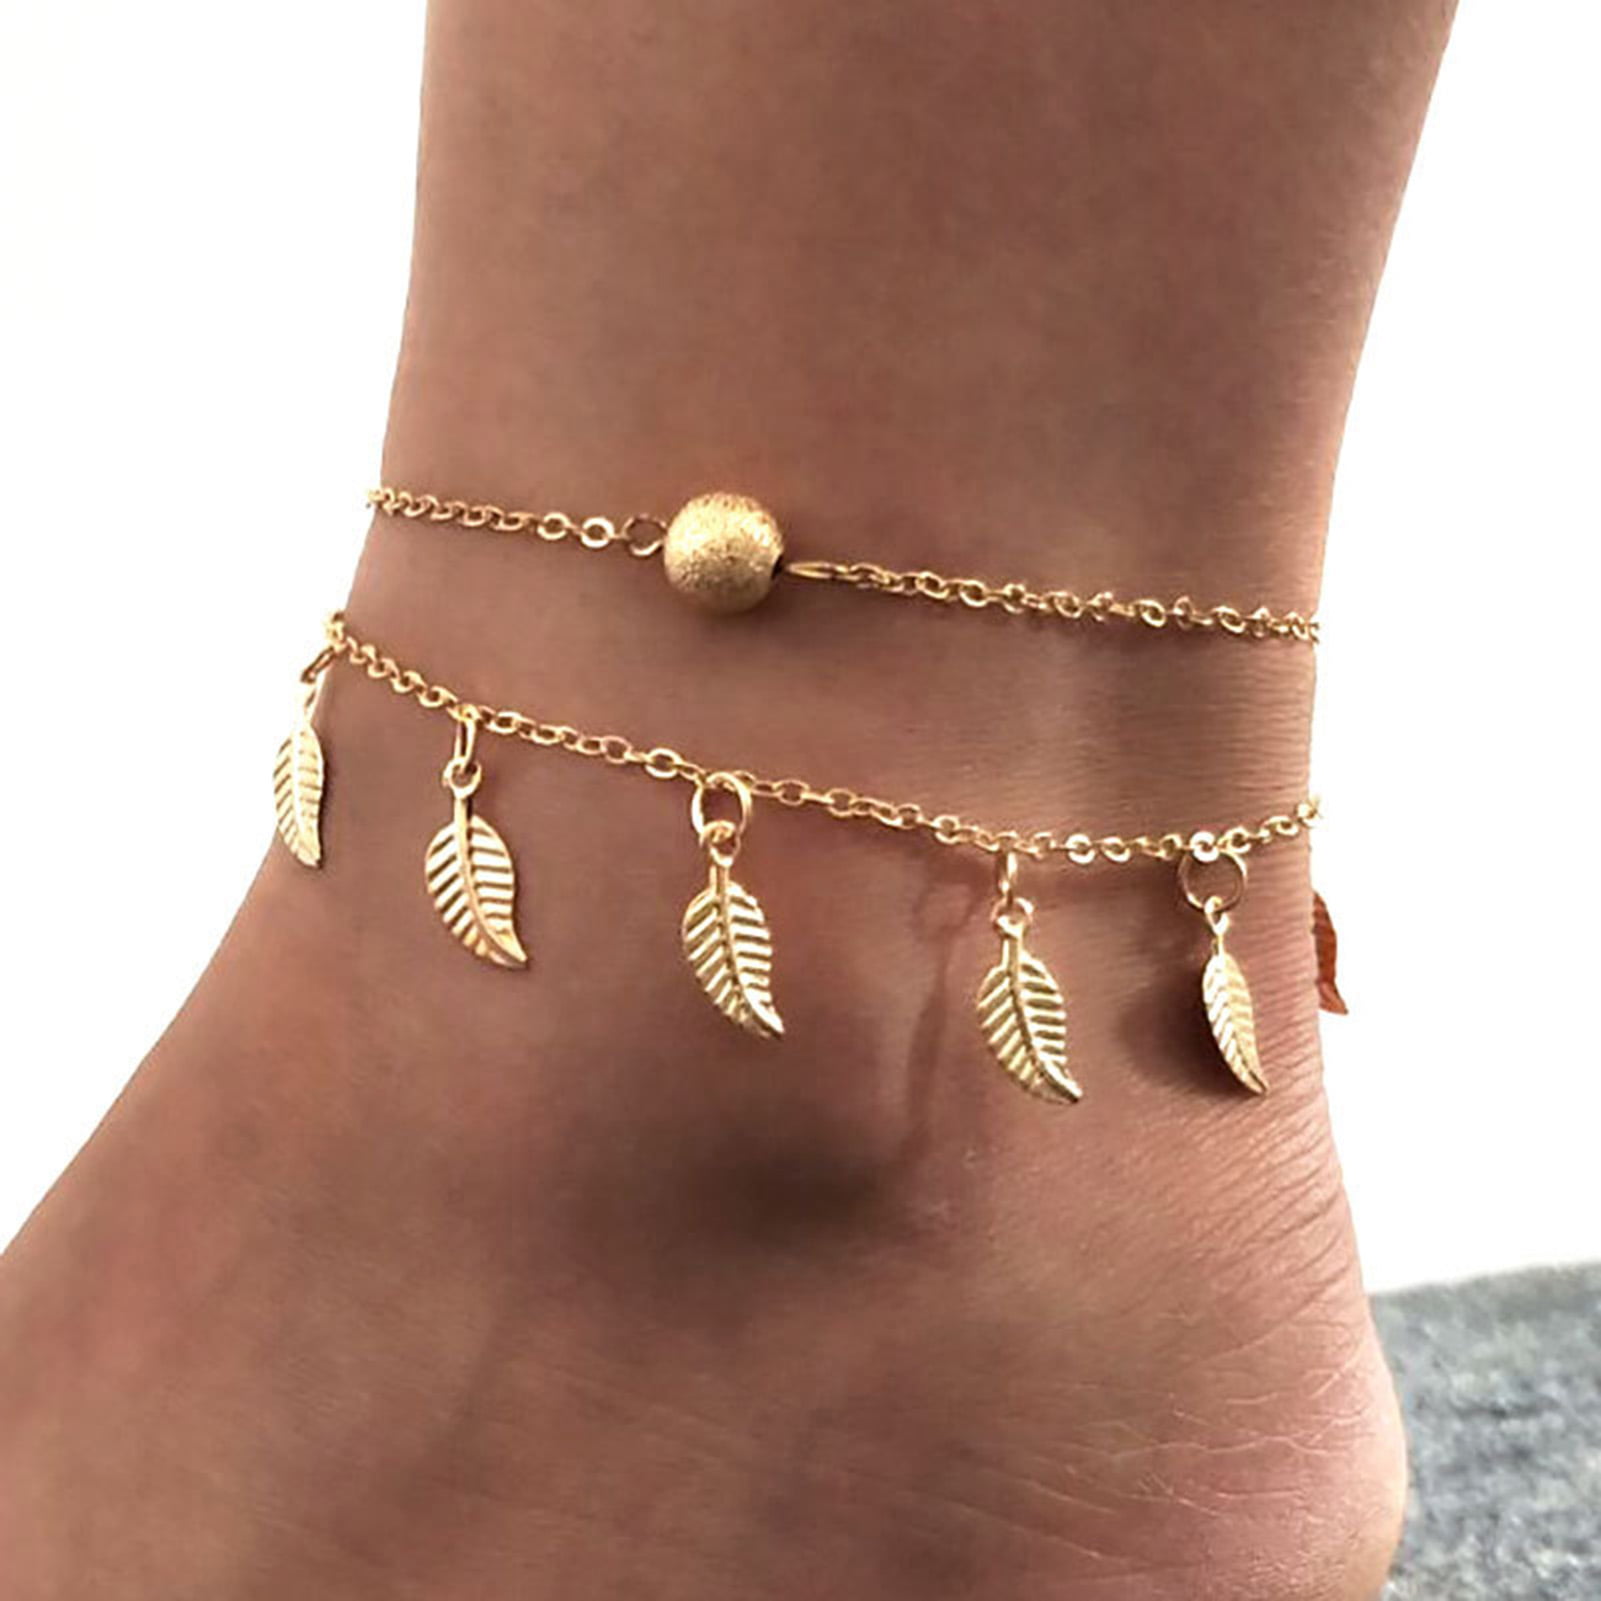 Boho Anklet Jewelry For Her Feather Silver Anklet Dangling Leaf Anklet Bracelet Feather Ankle Bracelet